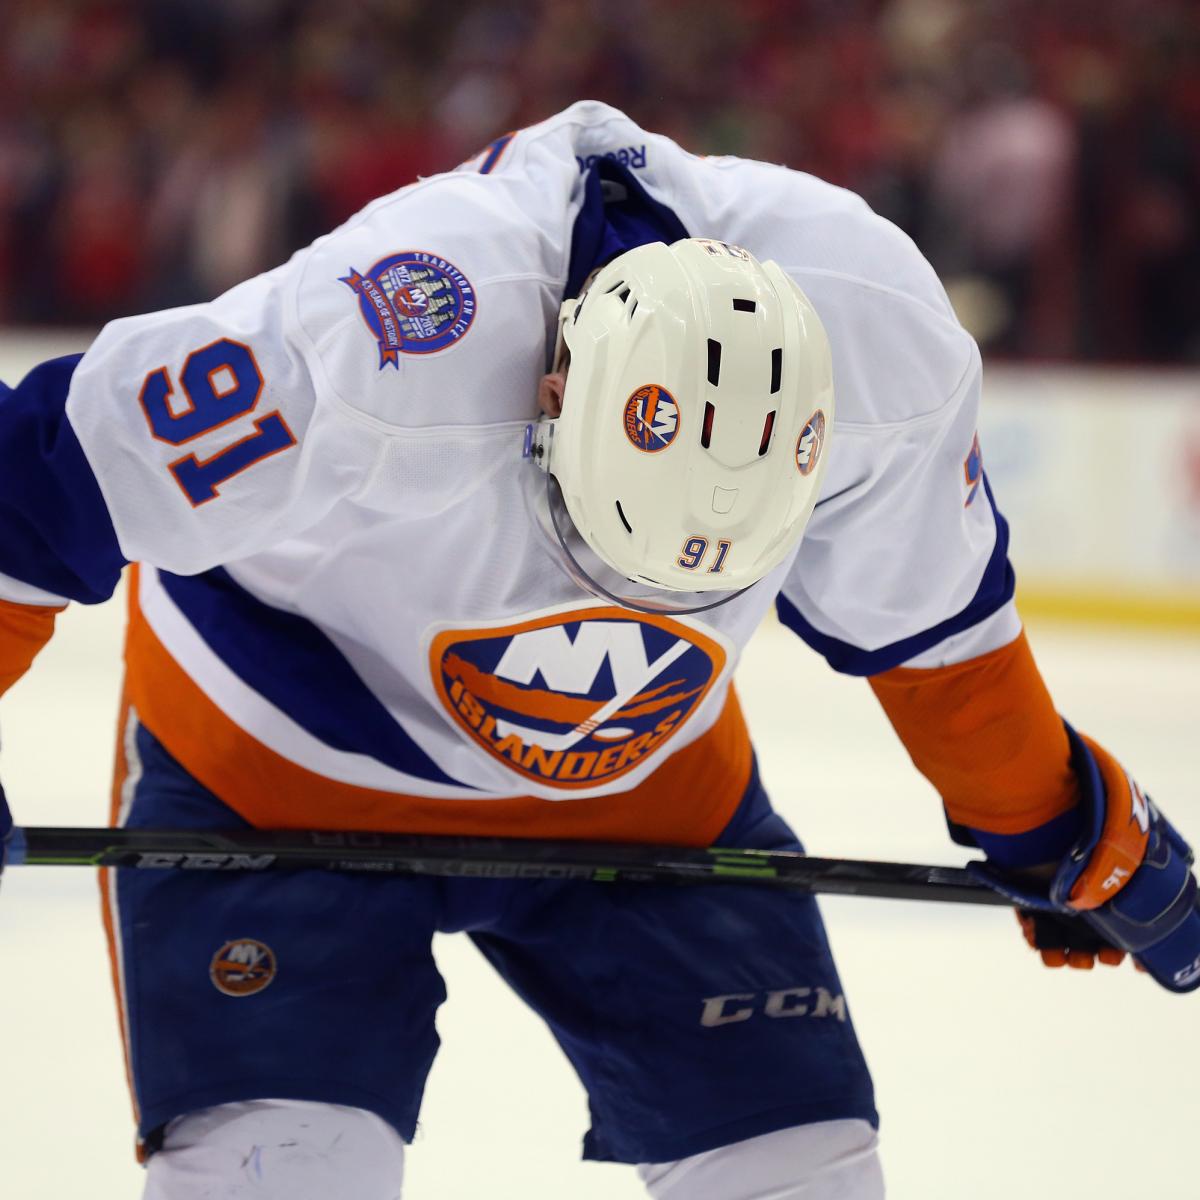 The Islanders acquisitions of Johnny Boychuk and Nick Leddy